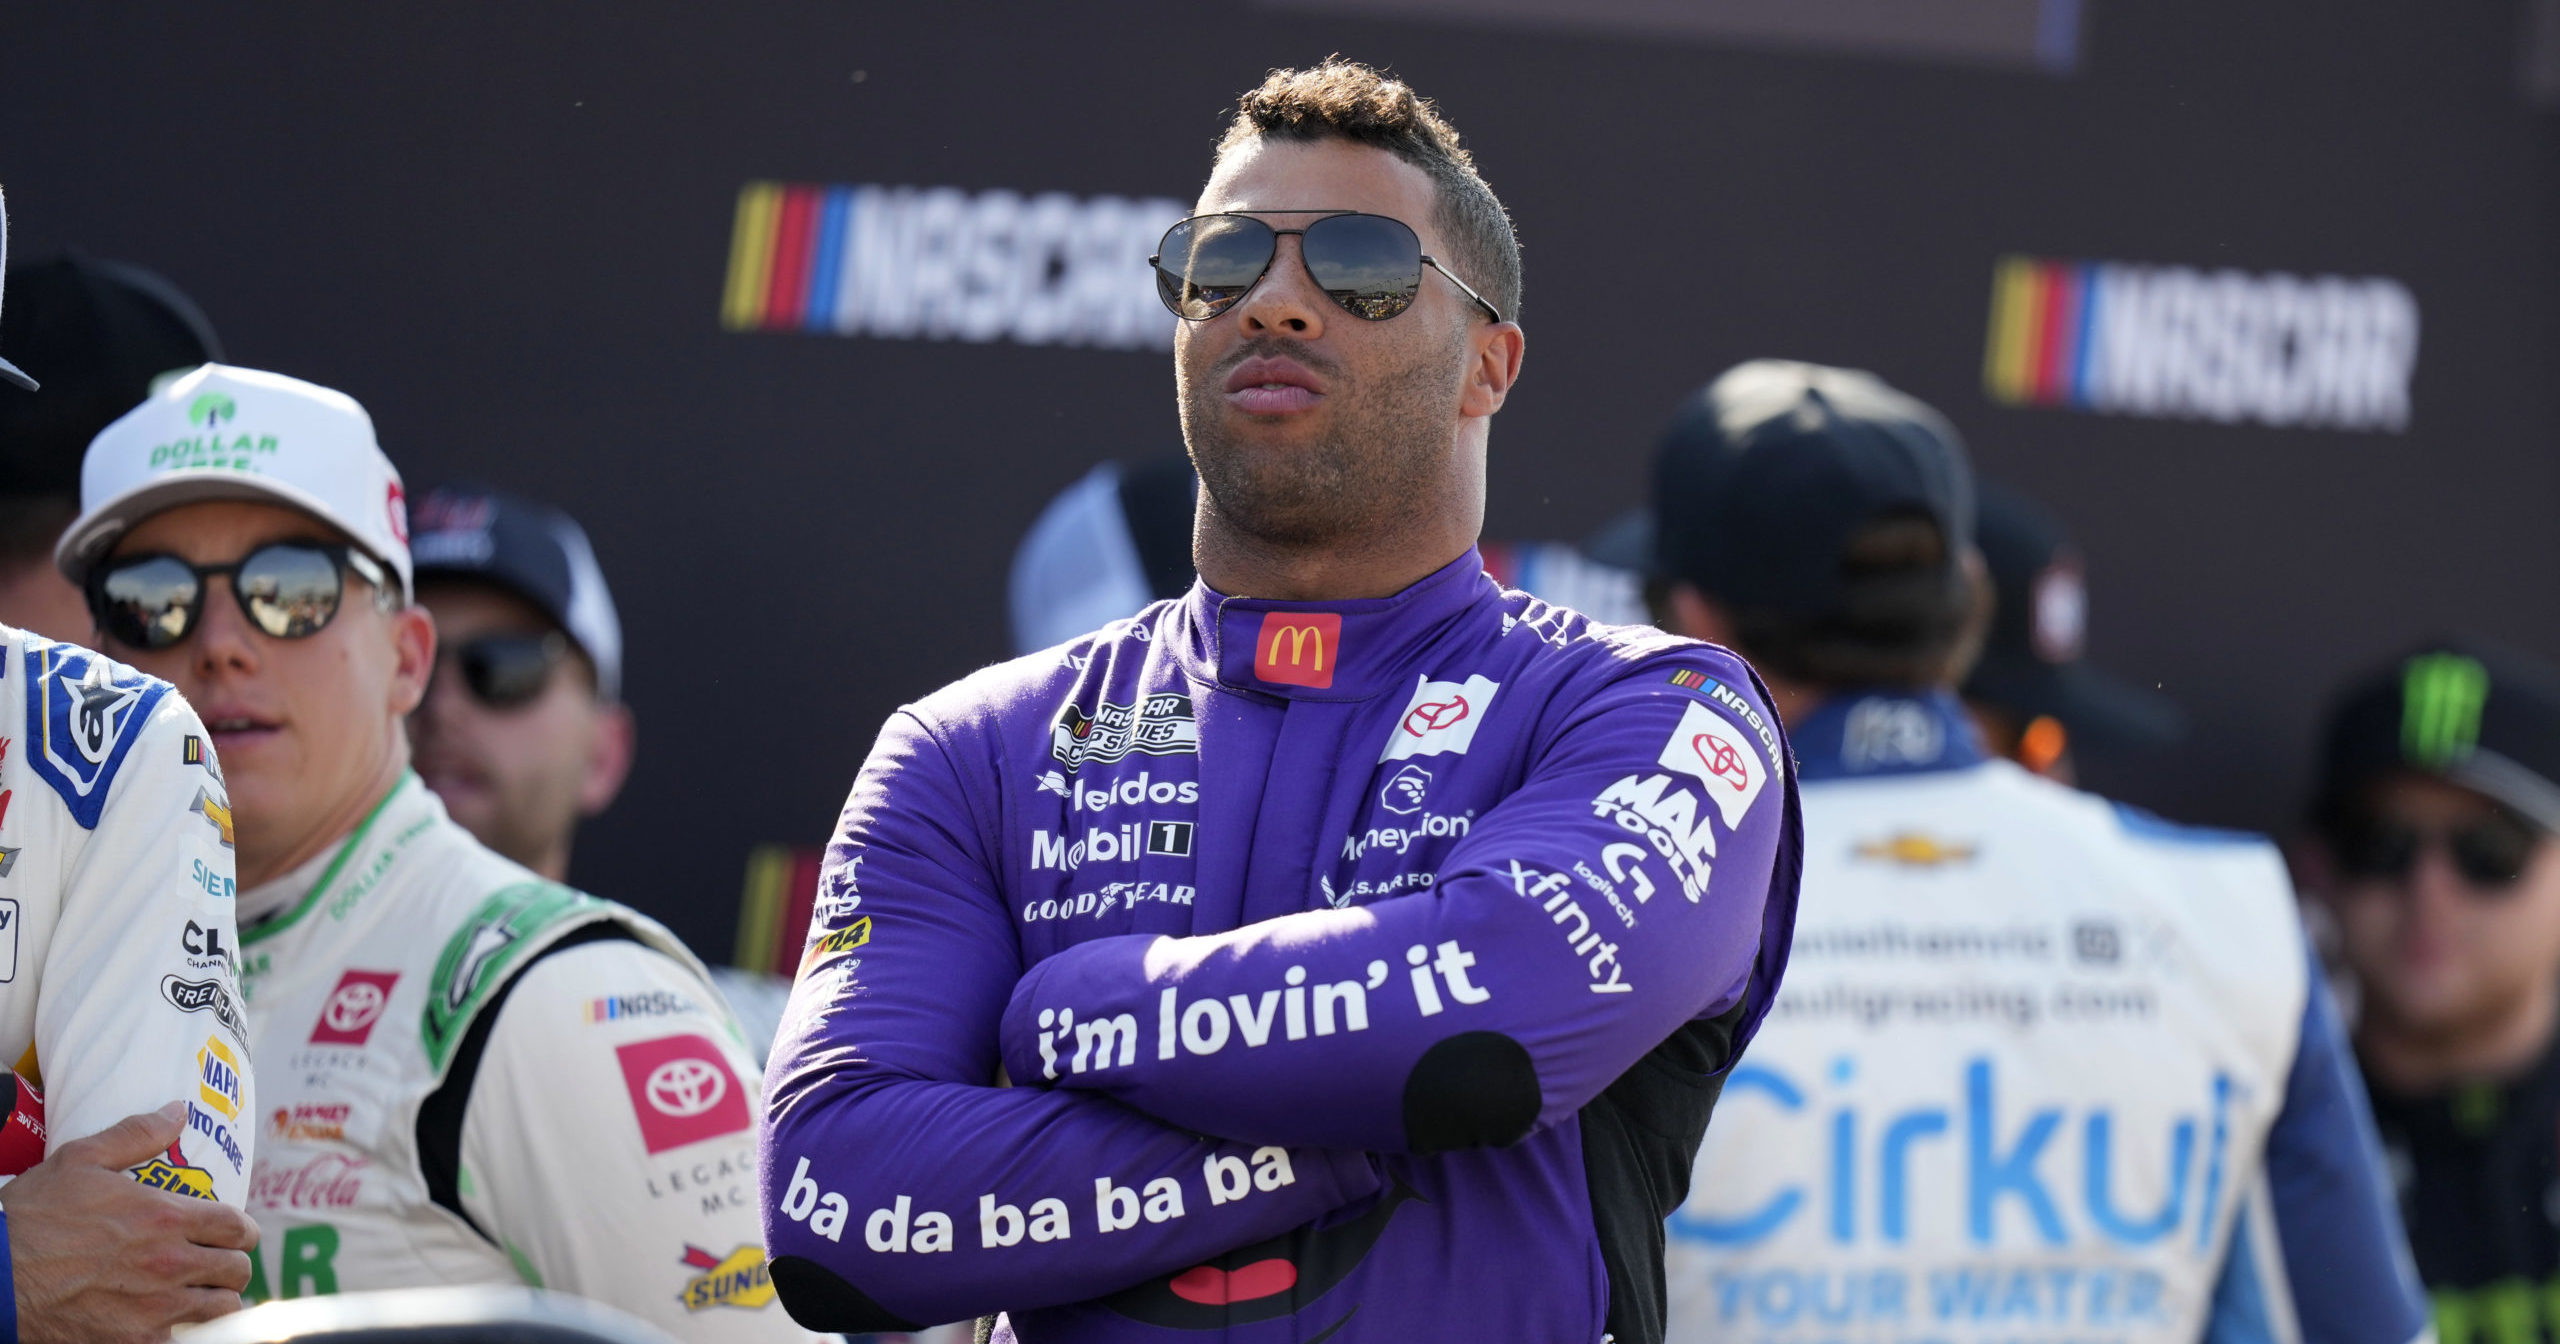 Bubba Wallace looks on before driver introductions at a NASCAR Cup Series auto race, Sunday, June 16, 204 at Iowa Speedway in Newton, Iowa.